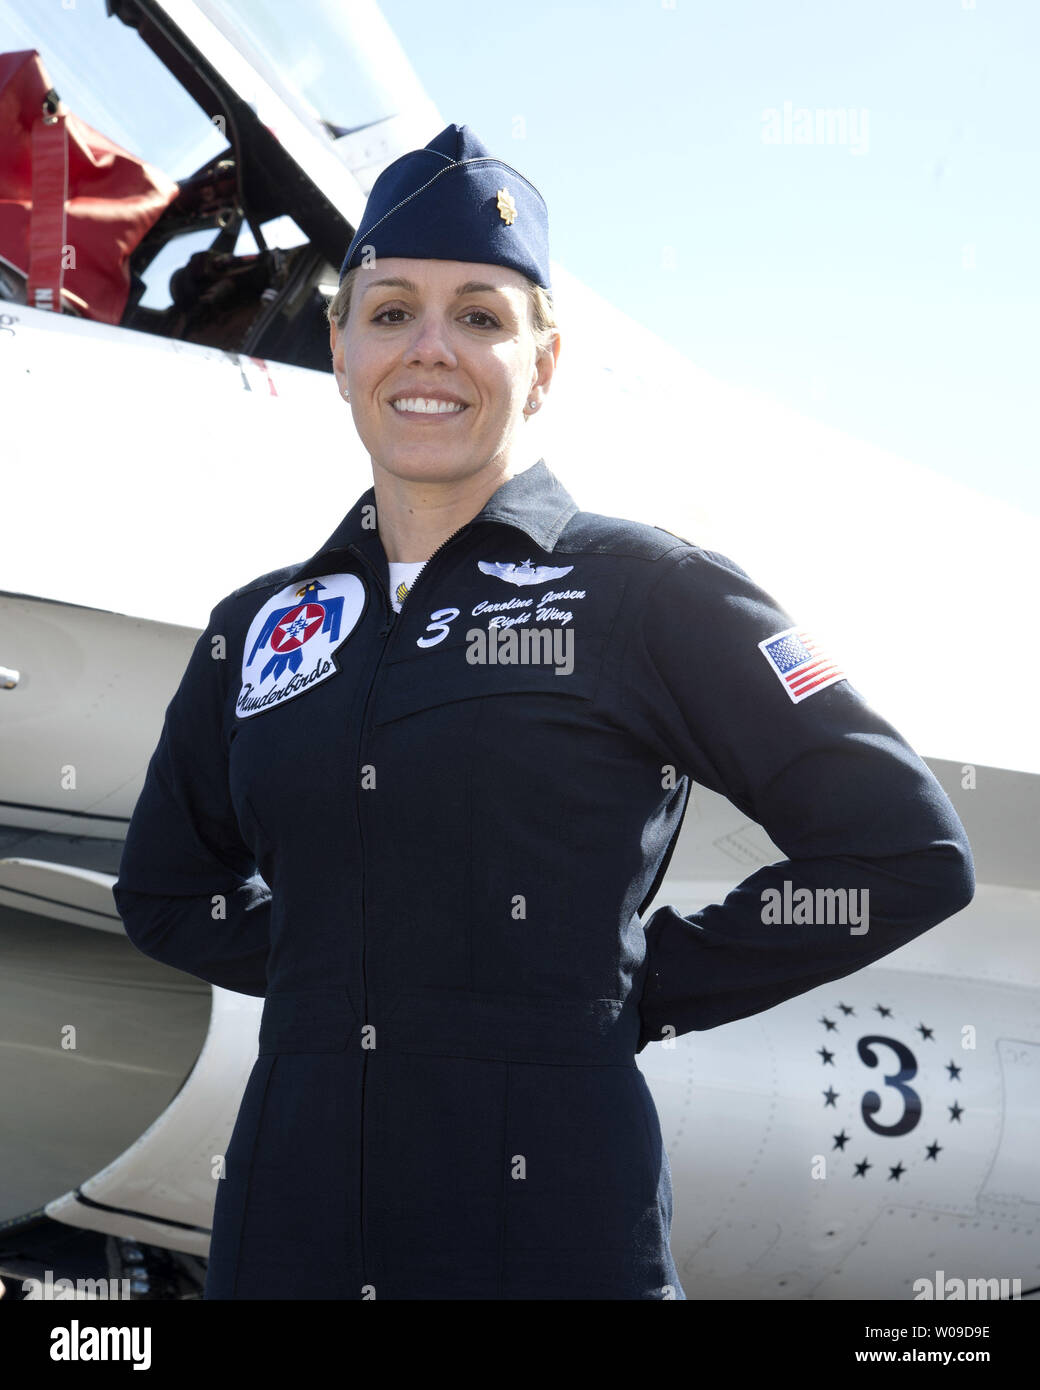 The United States Air Force Thunderbirds Flight Crew member, Caroline Jensen, arrived at the Patrick Air Force Base, Florida on March 21, 2013. Ms. Jensen, flies aircraft #3 as 'Right Wing' with the aerial demonstration team which is scheduled to perform at the Tico Warbird Air Show at the Space Coast Regional Airport in Titusville throughout the weekend. In response to sequestration actions by the US Government, the Air Force and Air Combat Command officials have decided to cancel all remaining aerial demonstration team Air Show activities as of April 1. The flight team will conduct their fin Stock Photo